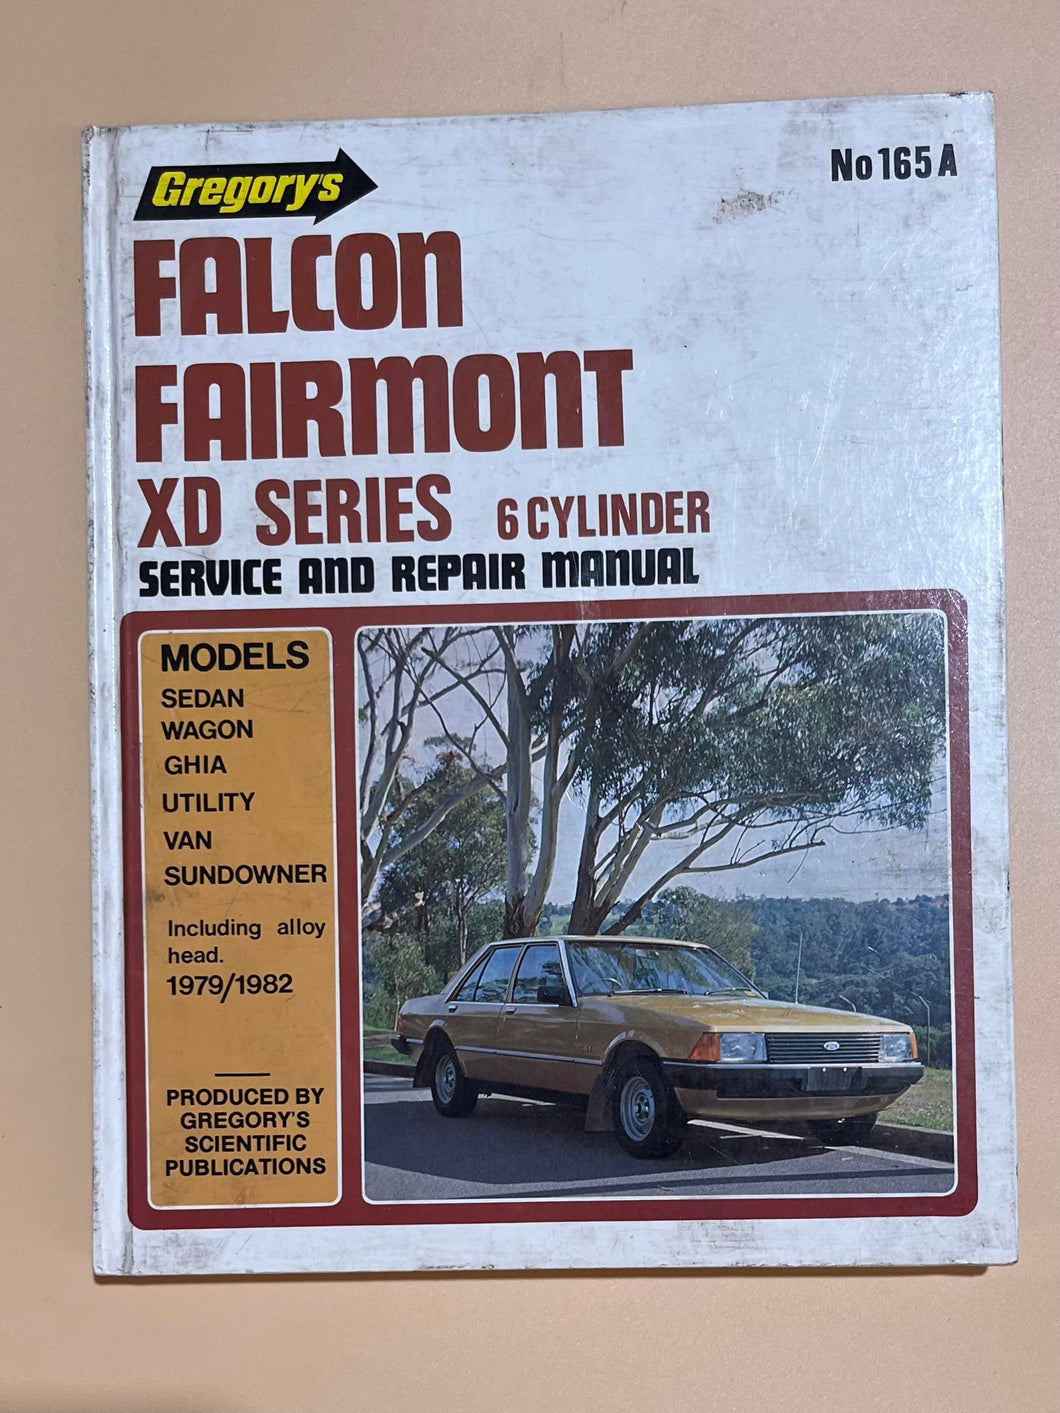 Falcon Fairmont XD Series 6 Cylinder Service and Repair Manual